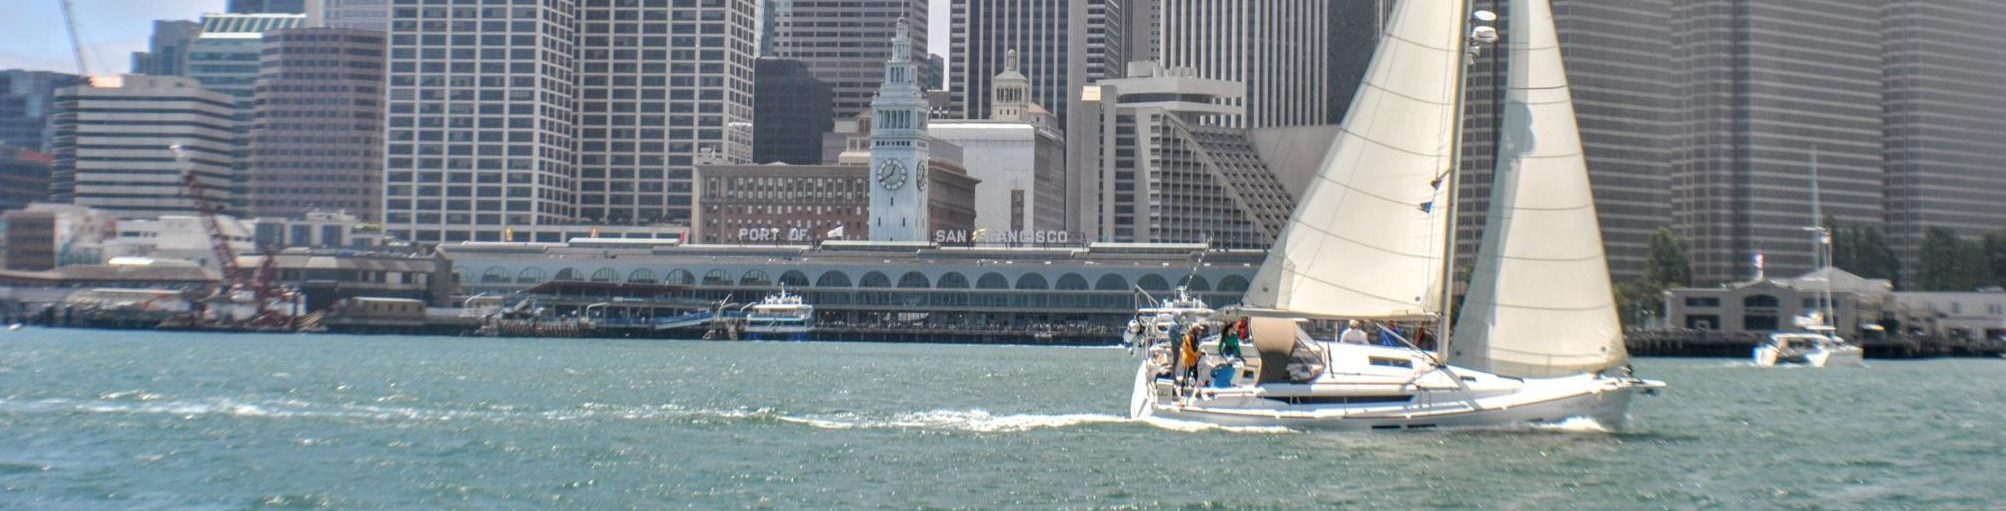 Sun Odyssey 419 Shell Bell sailing past San Francisco waterfront